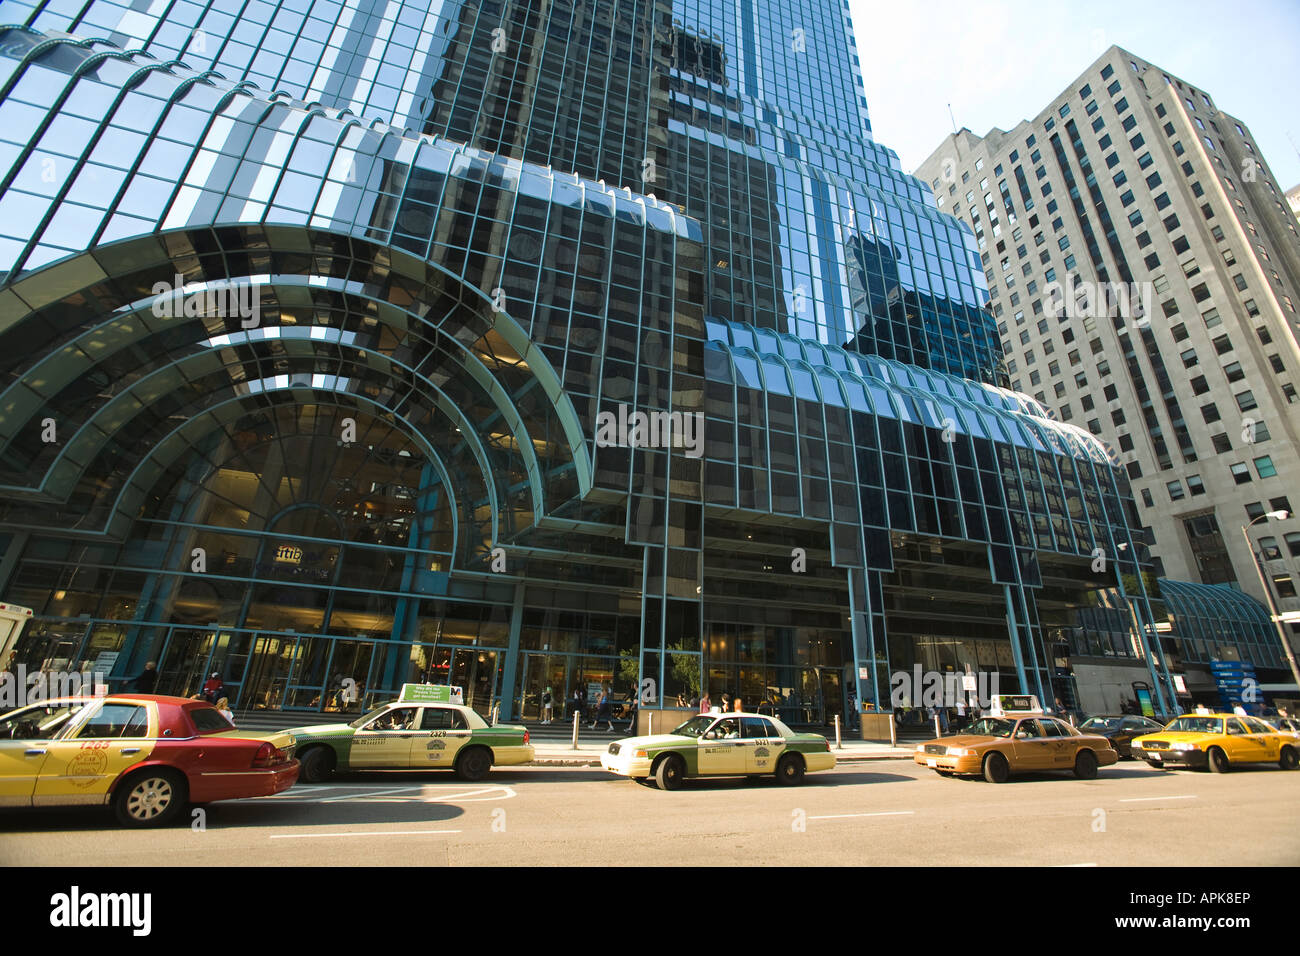 ILLINOIS Chicago Taxi cabs in row outside Ogilvie Transportation building office building highrise and commuter train station Stock Photo